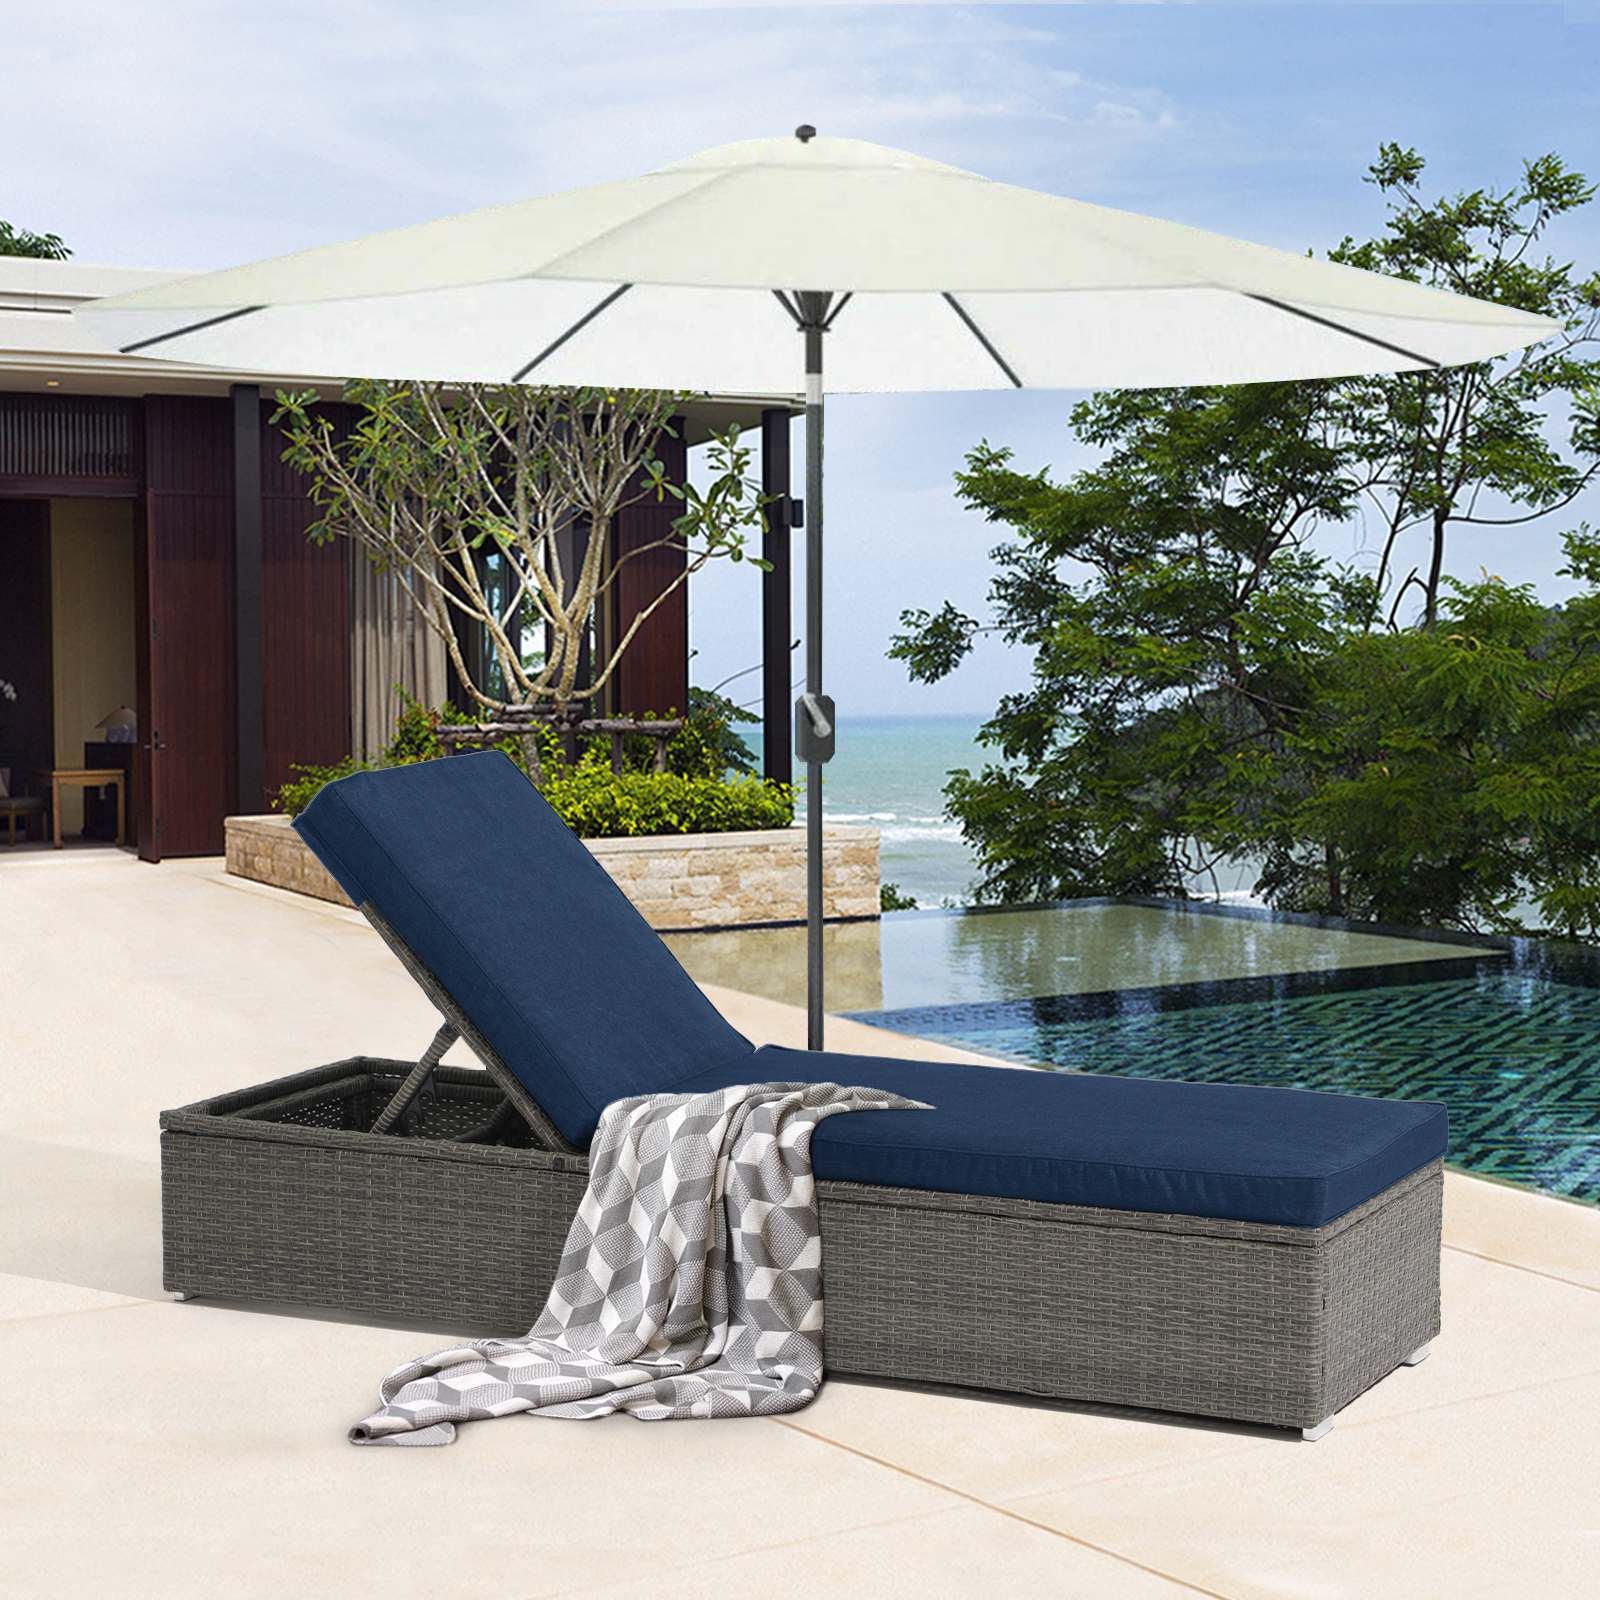 JOIVI Outdoor Chaise Lounge Chair, Patio Reclining Sun Lounger, Gray Wicker Rattan Adjustable Lounge Chair, Steel Frame with Removable Navy Blue Cushions, for Poolside, Deck and Backyard, 1 Pack - image 4 of 8